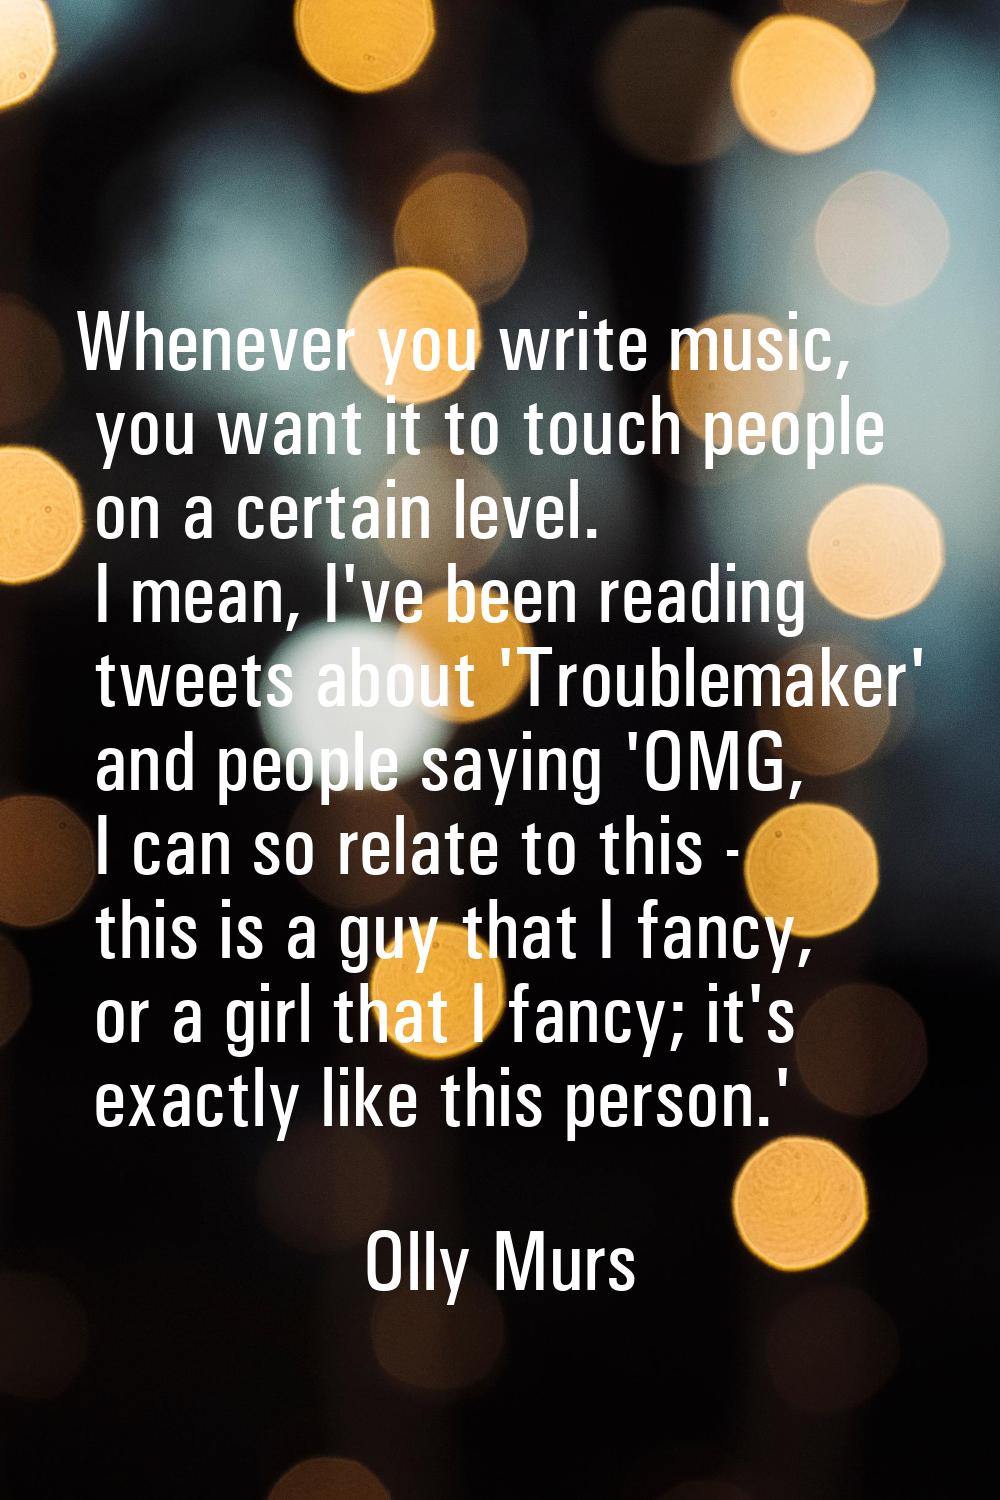 Whenever you write music, you want it to touch people on a certain level. I mean, I've been reading